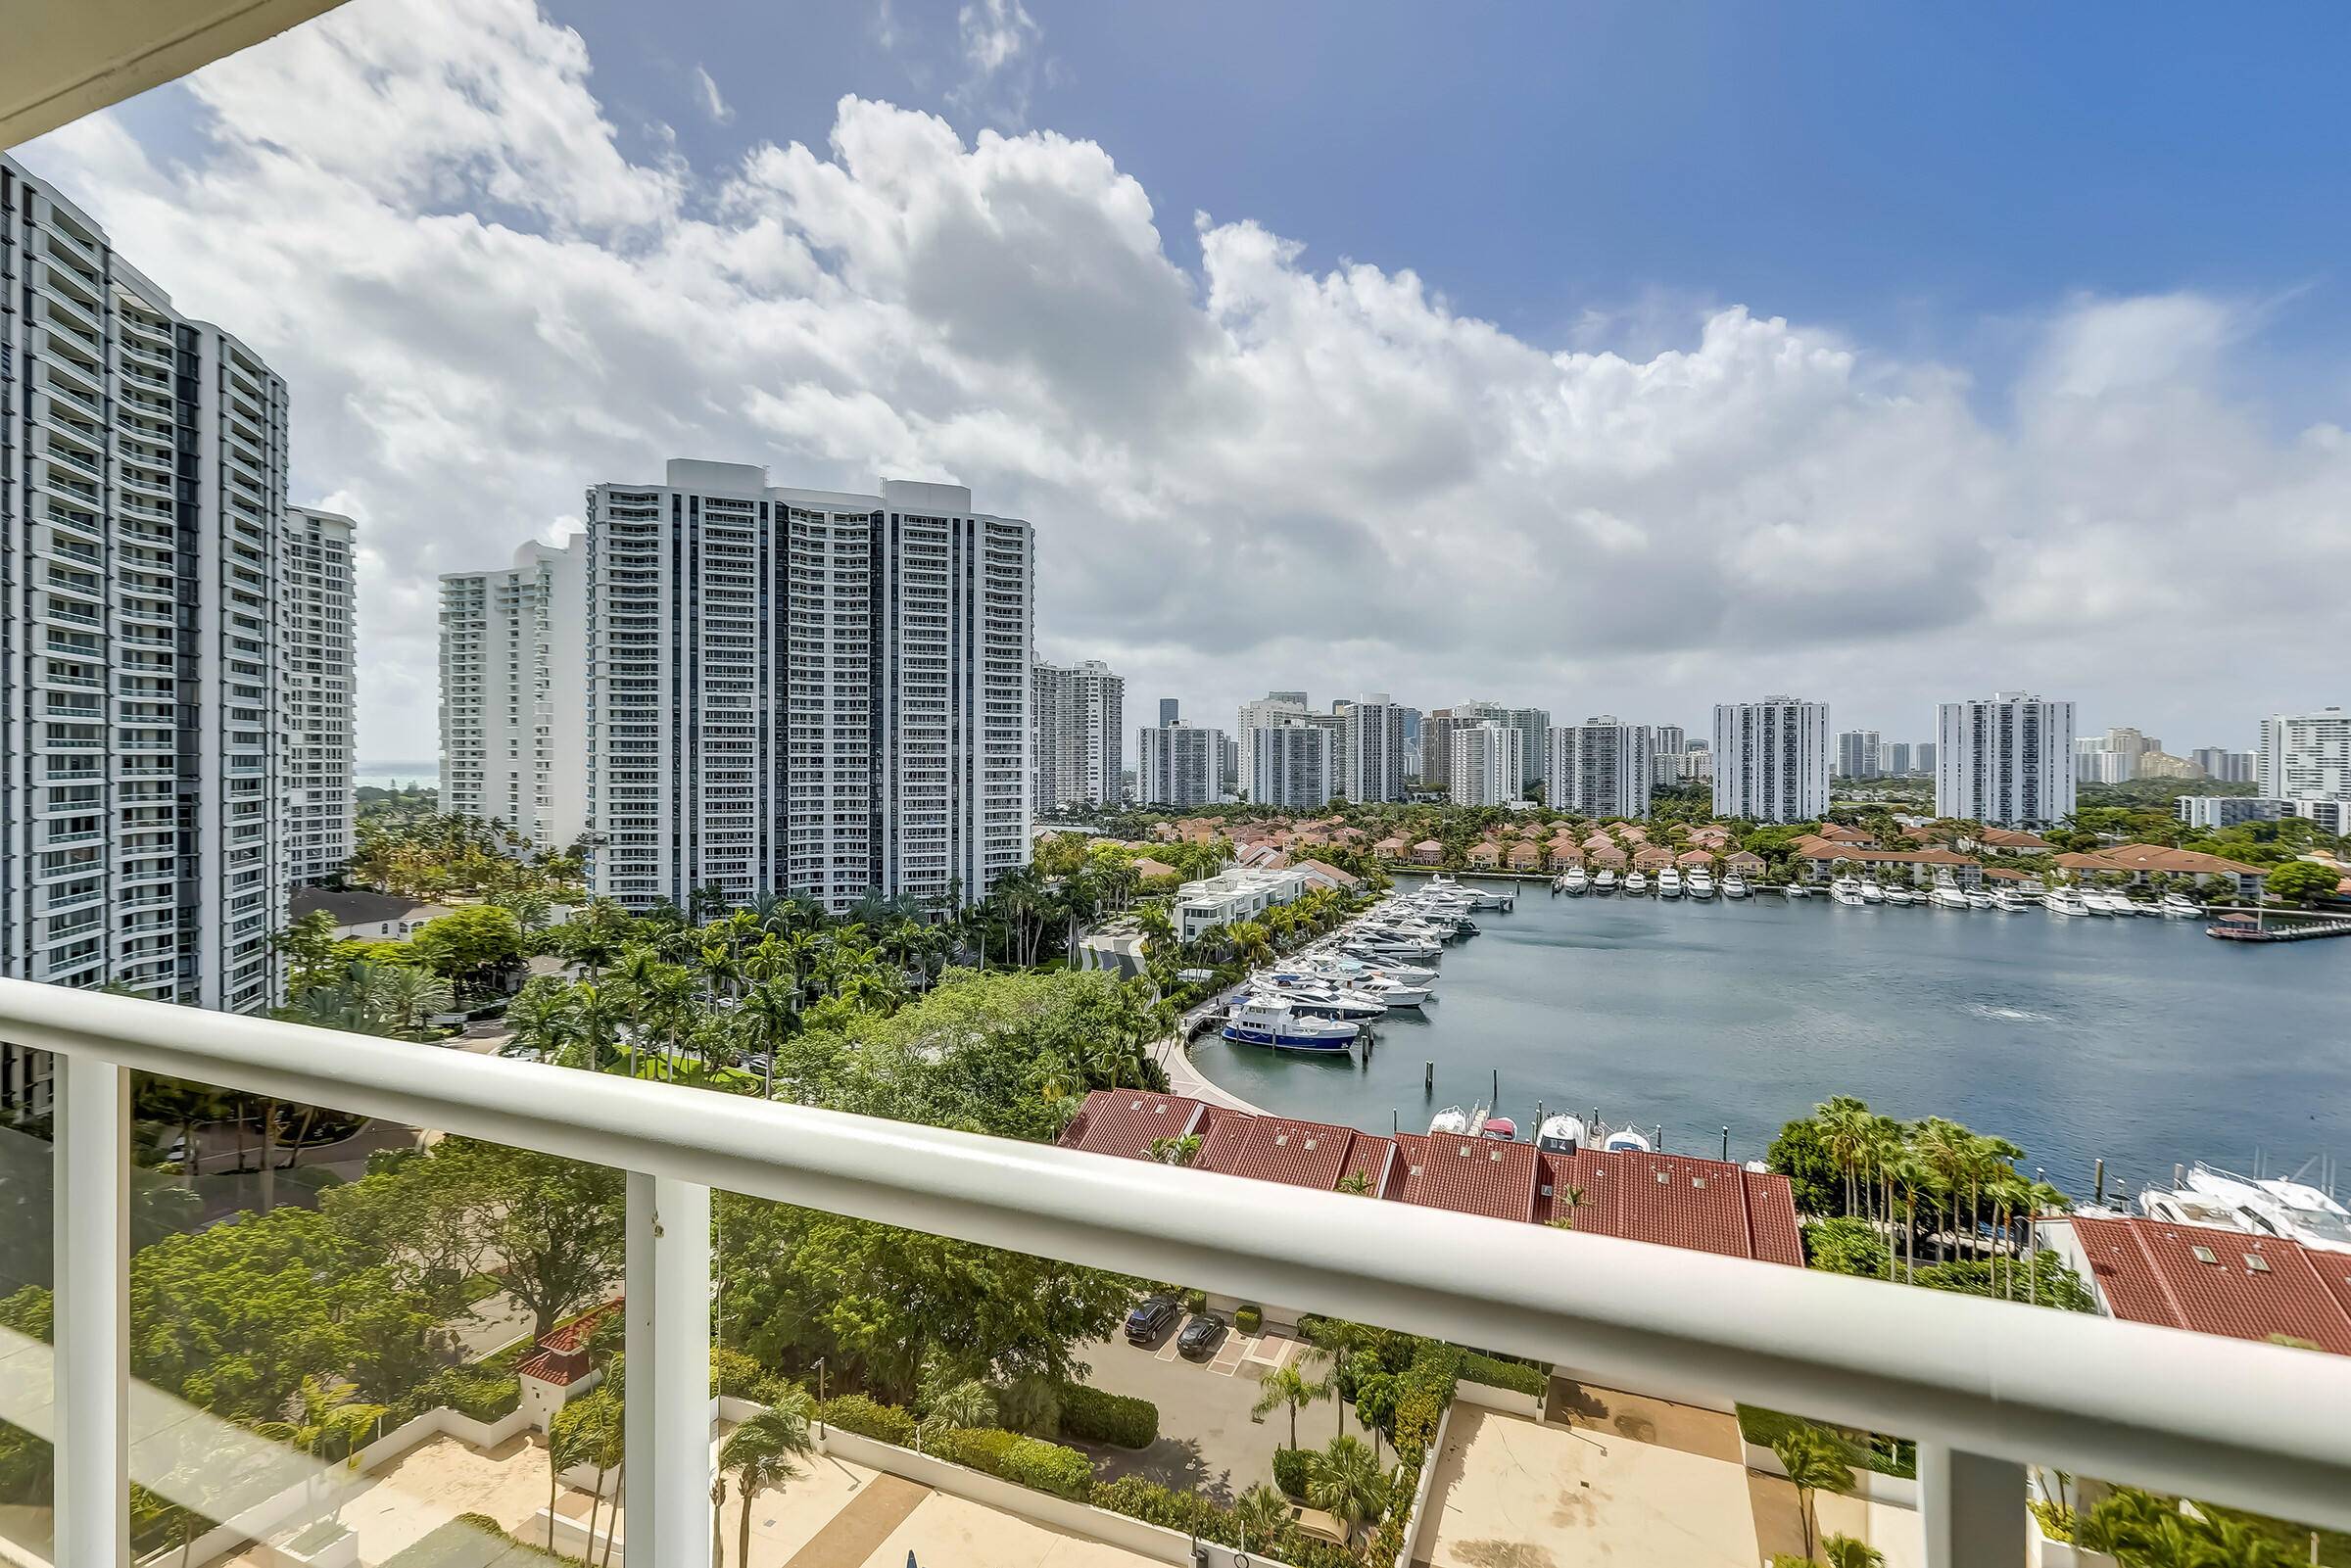 Stunning and Spacious 2 bedroom 2 bath condo with NOTHING BUT VIEWS, in this completely renovated condo !